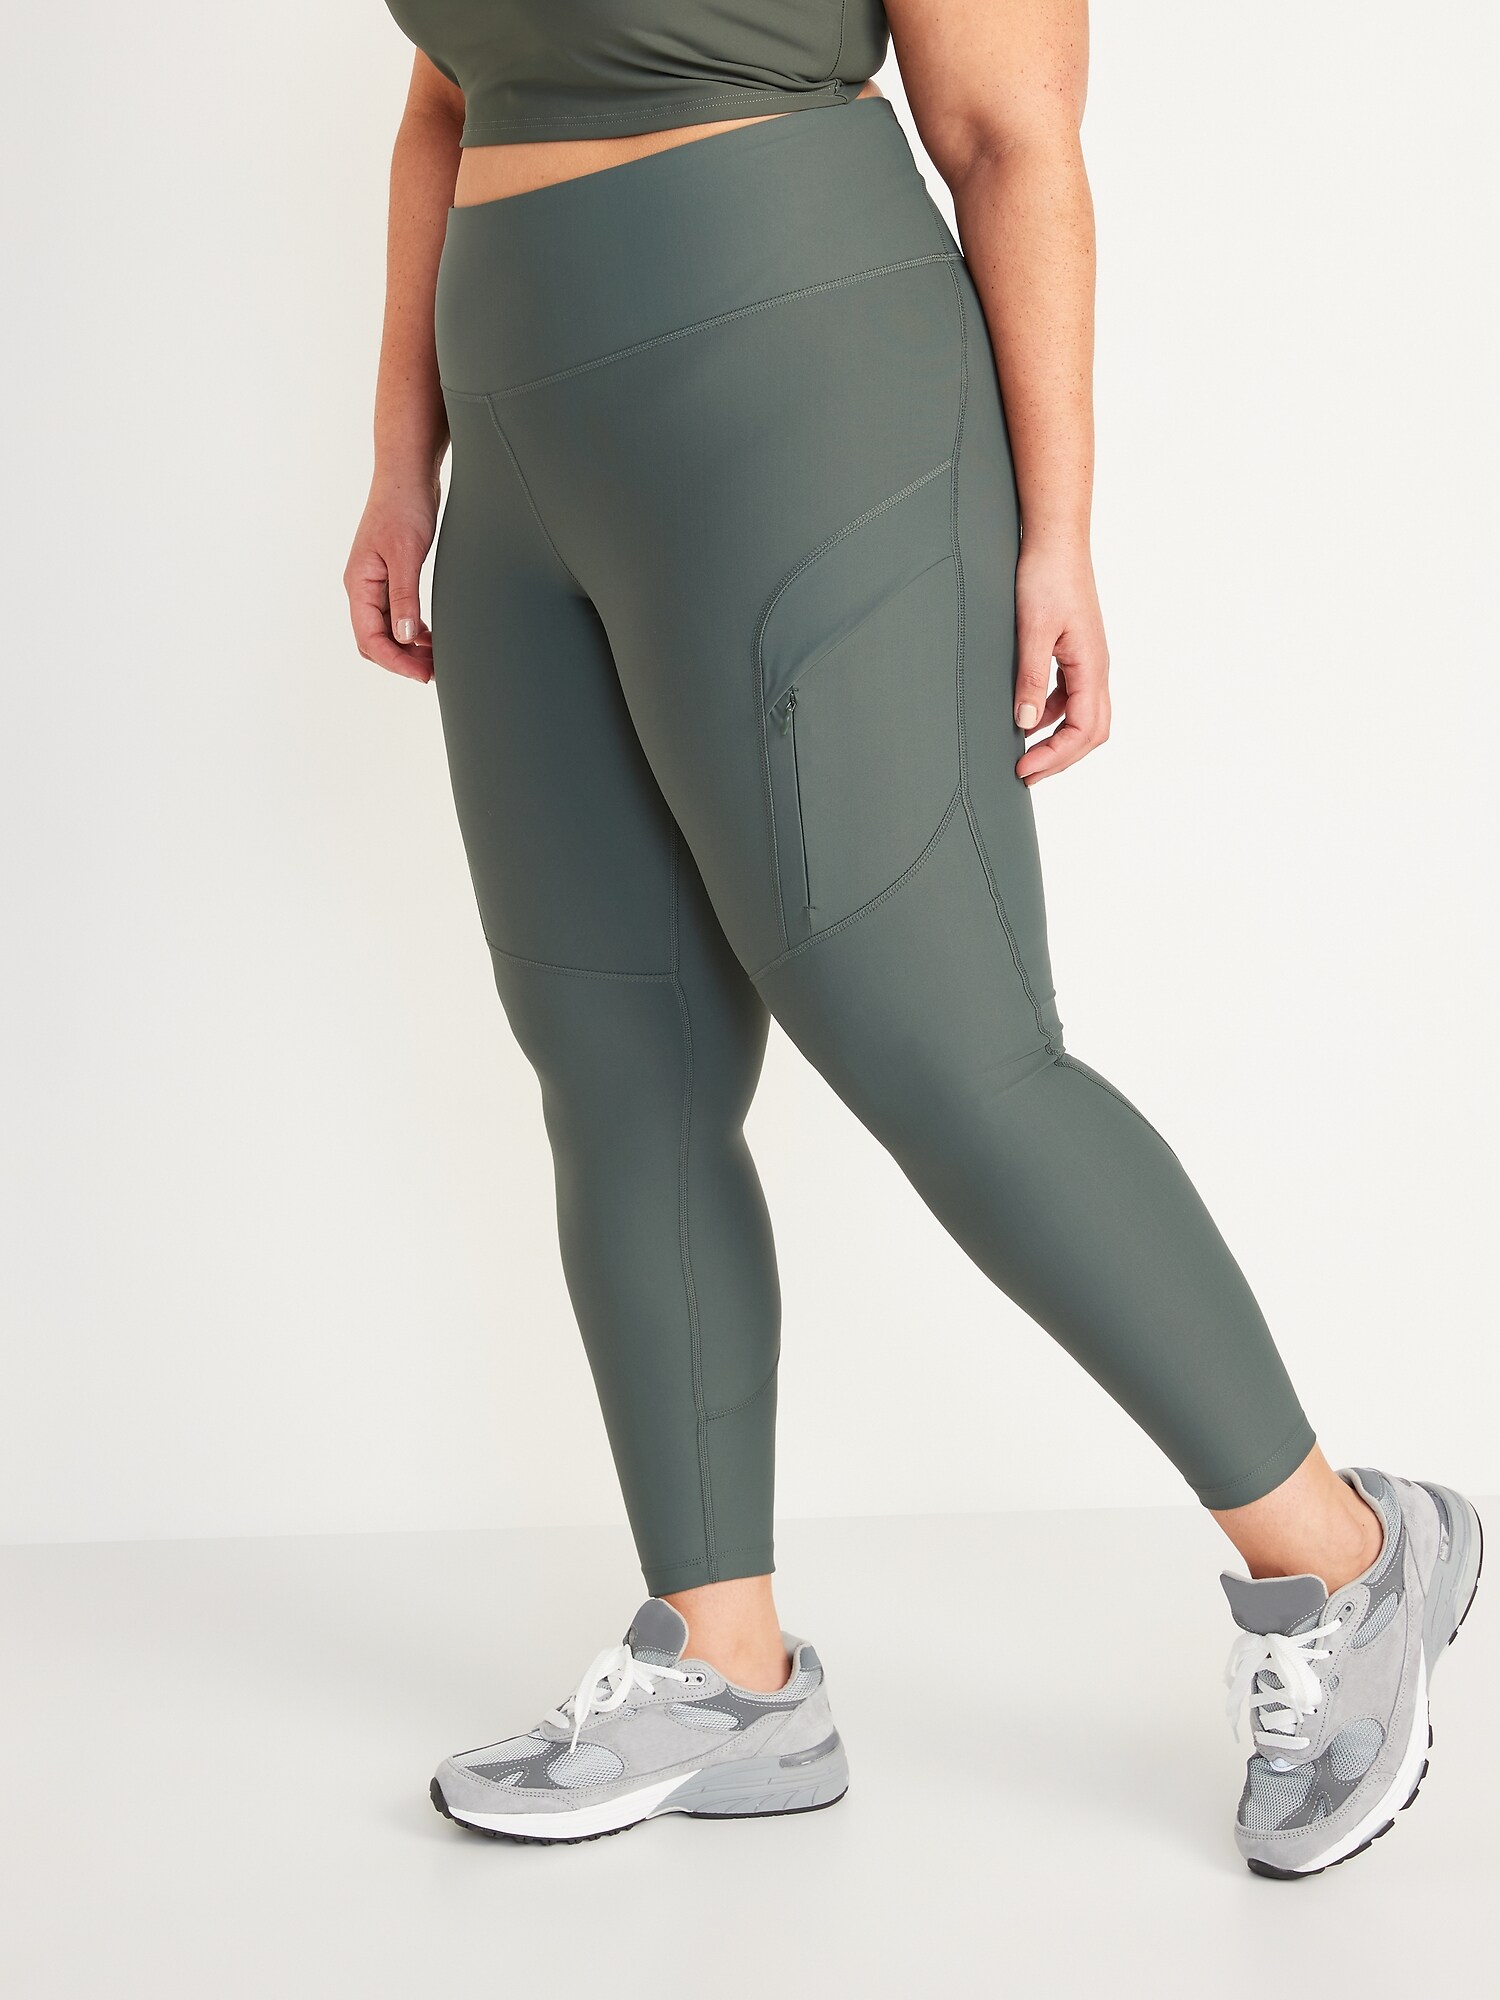 COMFY ONE Cargo Leggings with Pockets for Women High Waisted